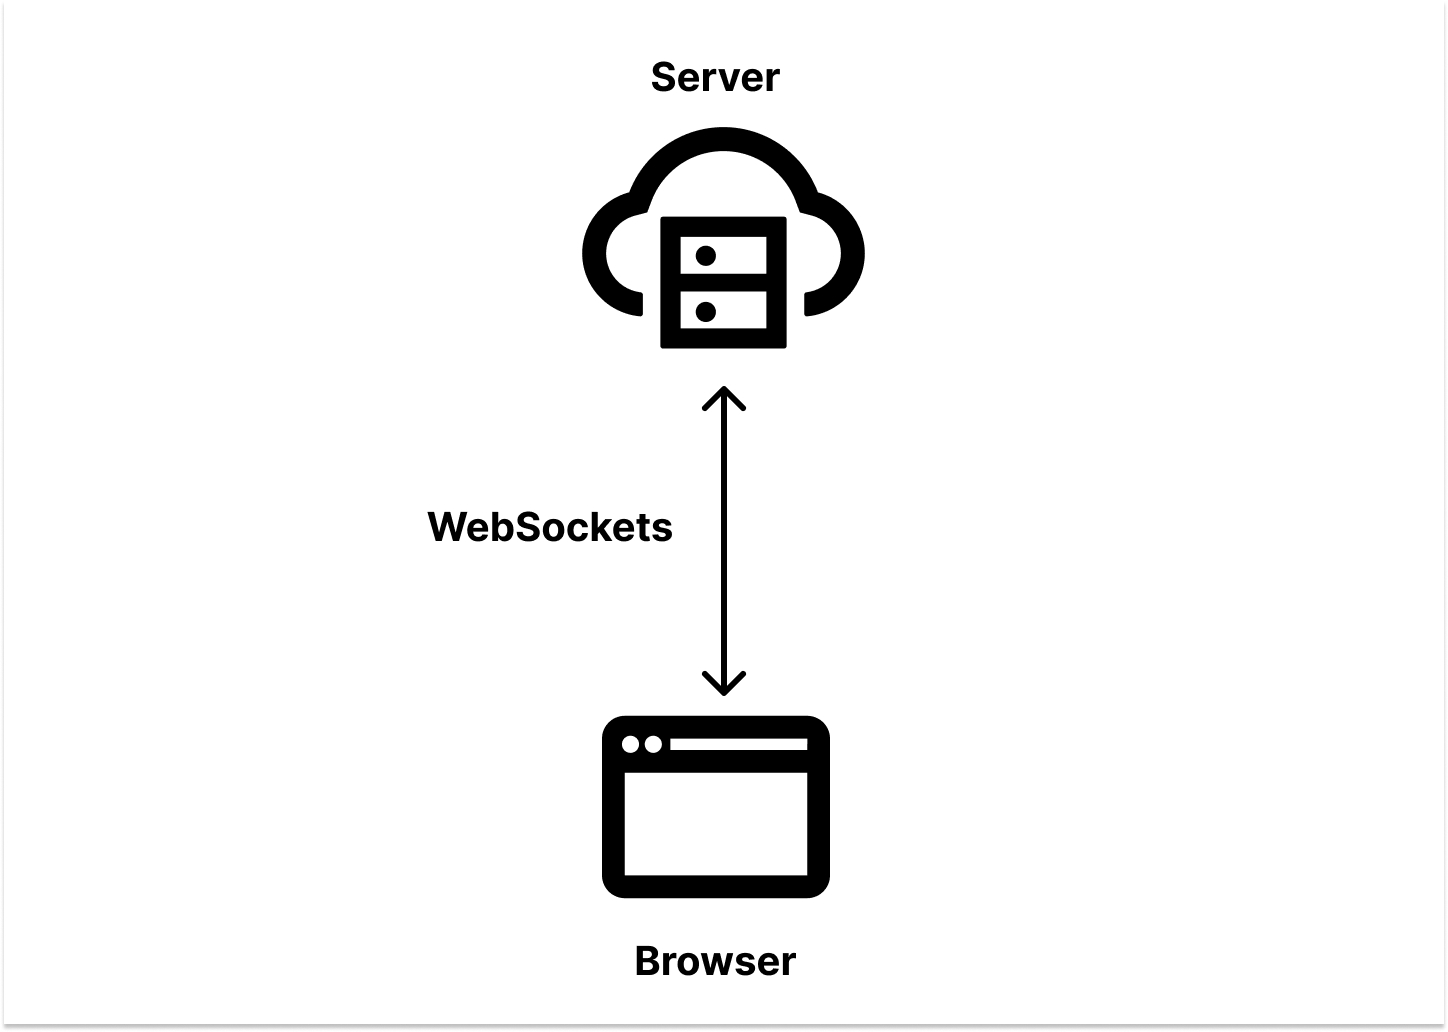 WebSockets connection server to one browser